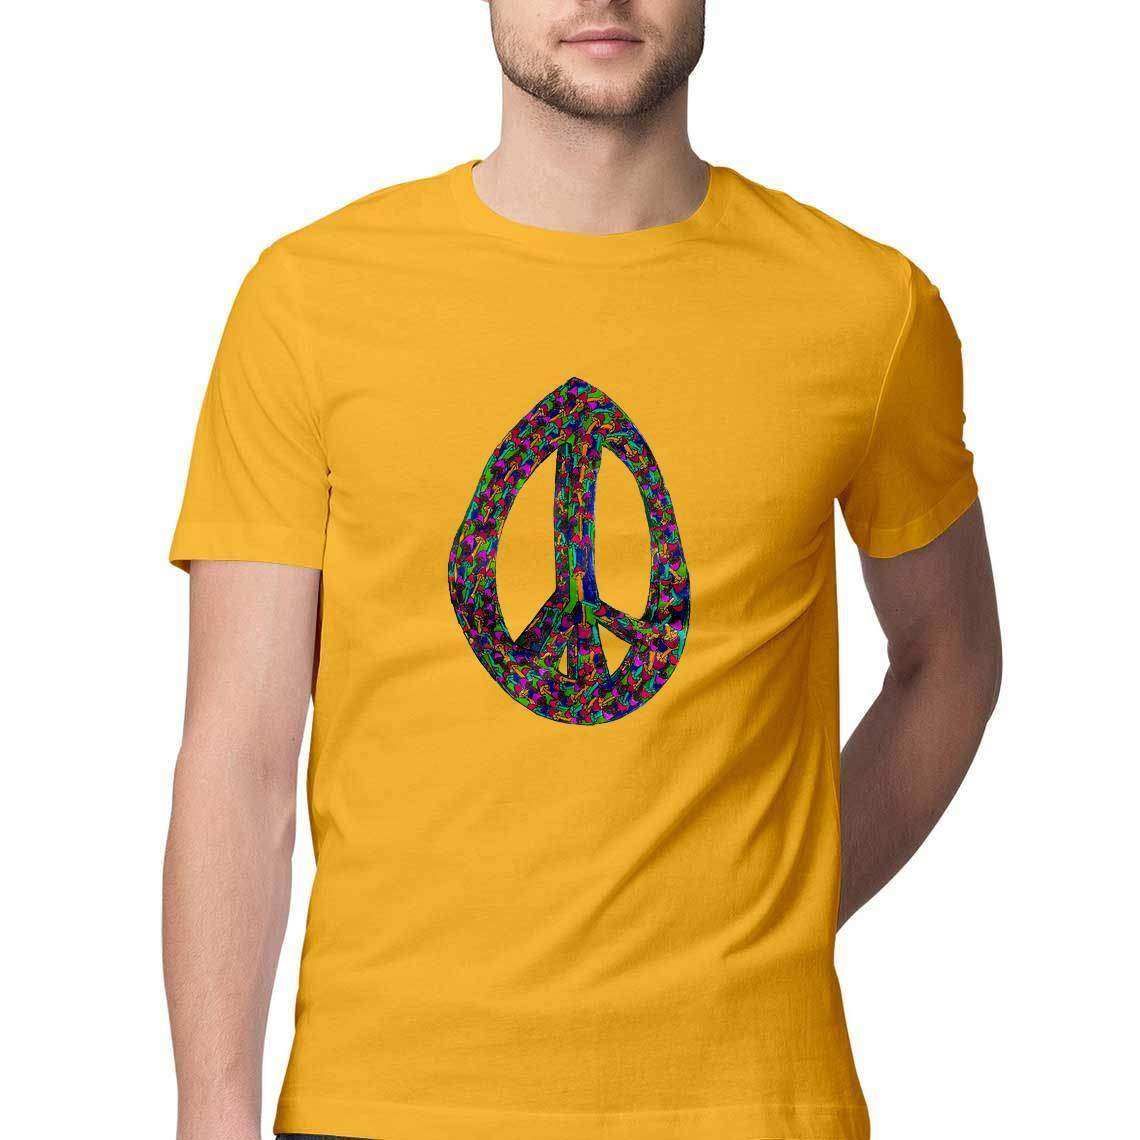 Peacefully Ecstatic Graphic T-Shirt - CBD Store India